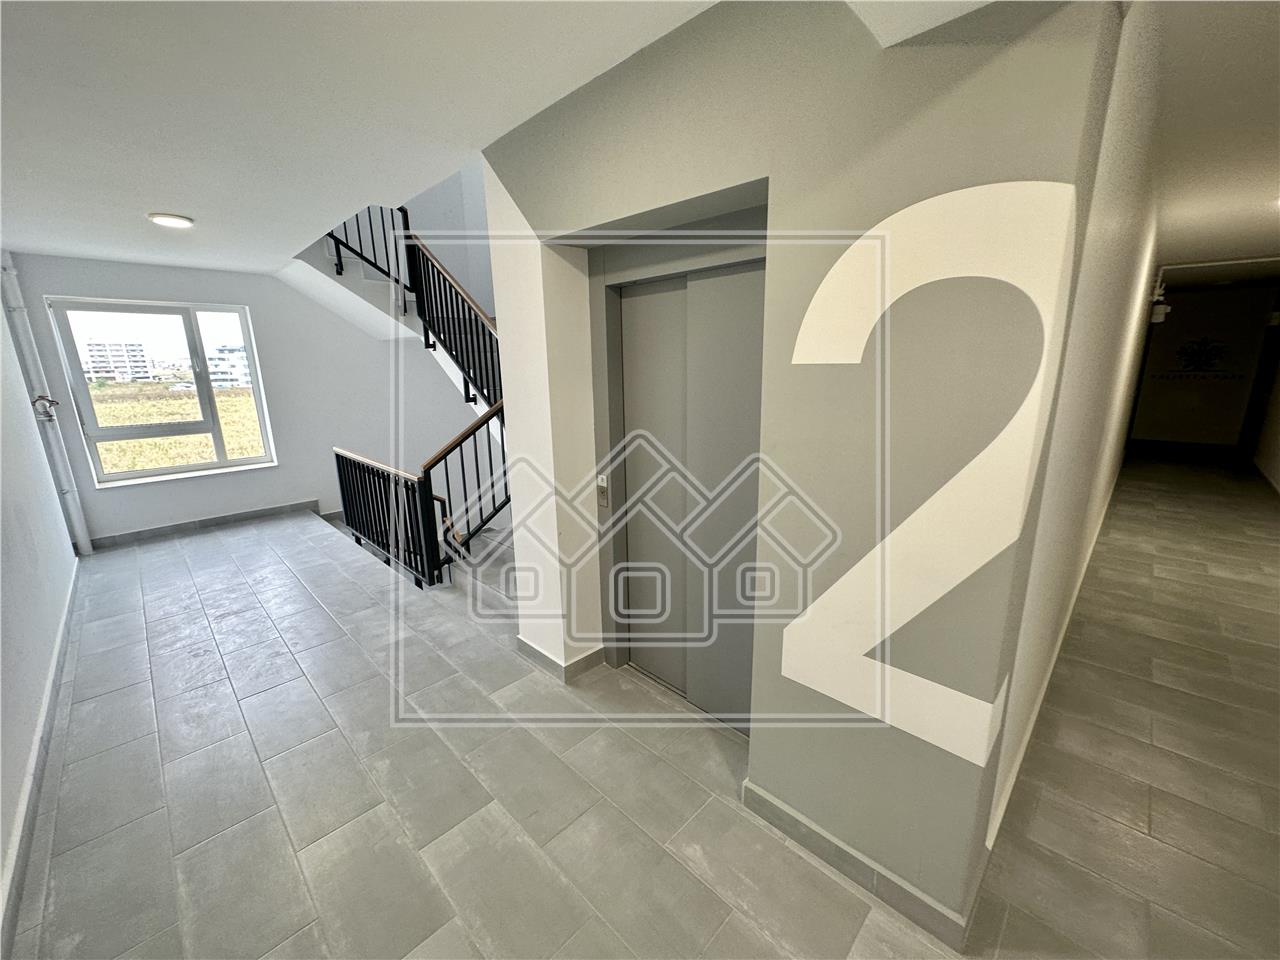 Apartment for sale in Sibiu - 3 rooms, 2 bathrooms